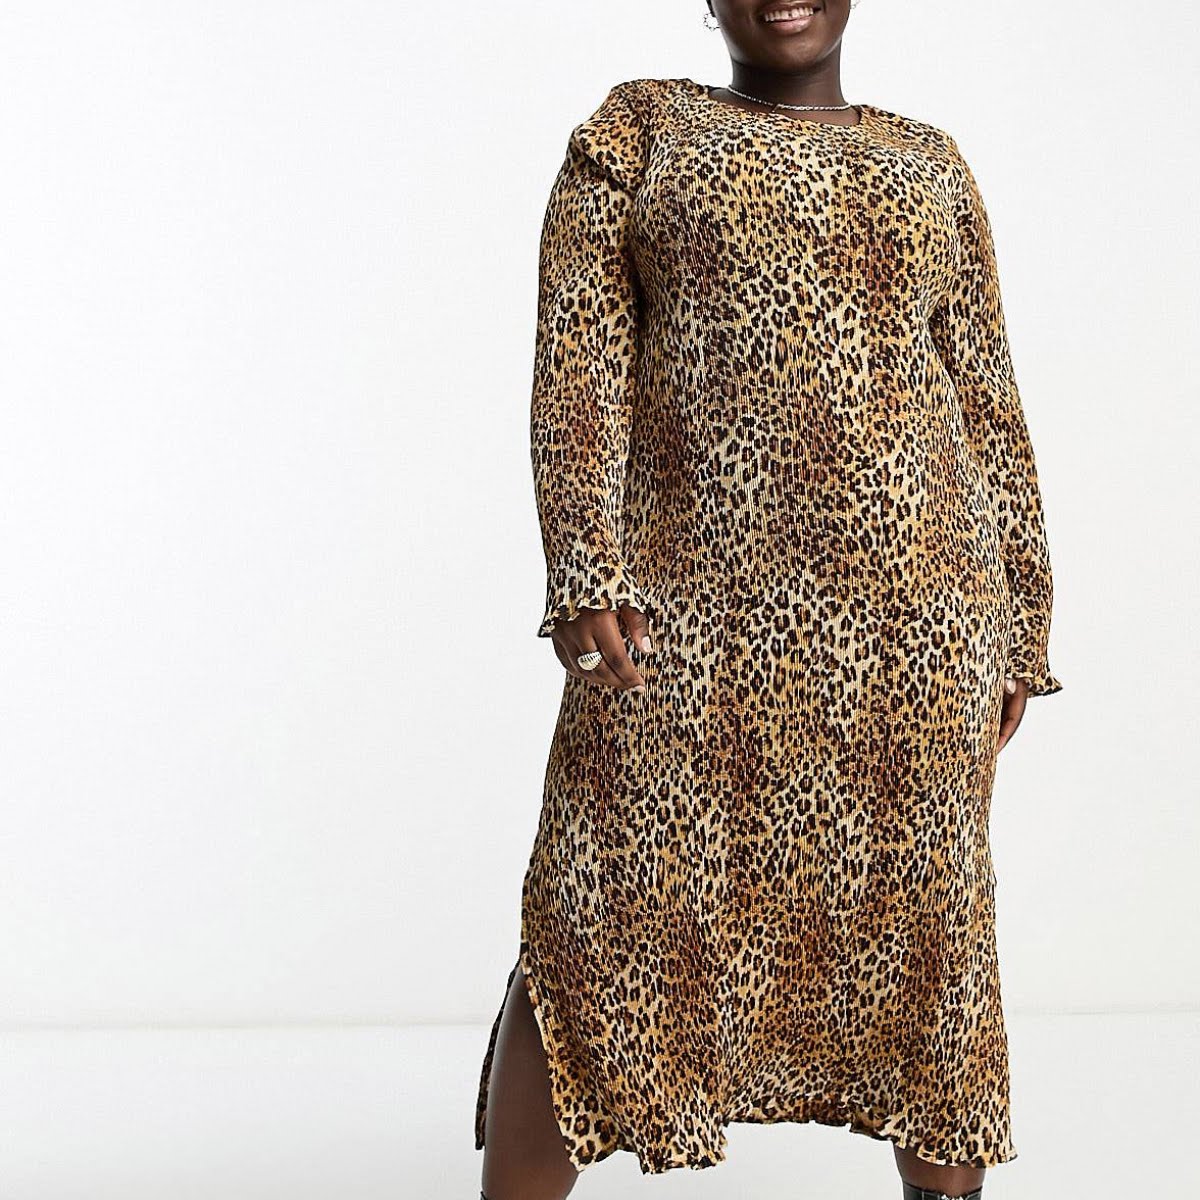 Take a walk on the wild side in leopard print | IMAGE.ie